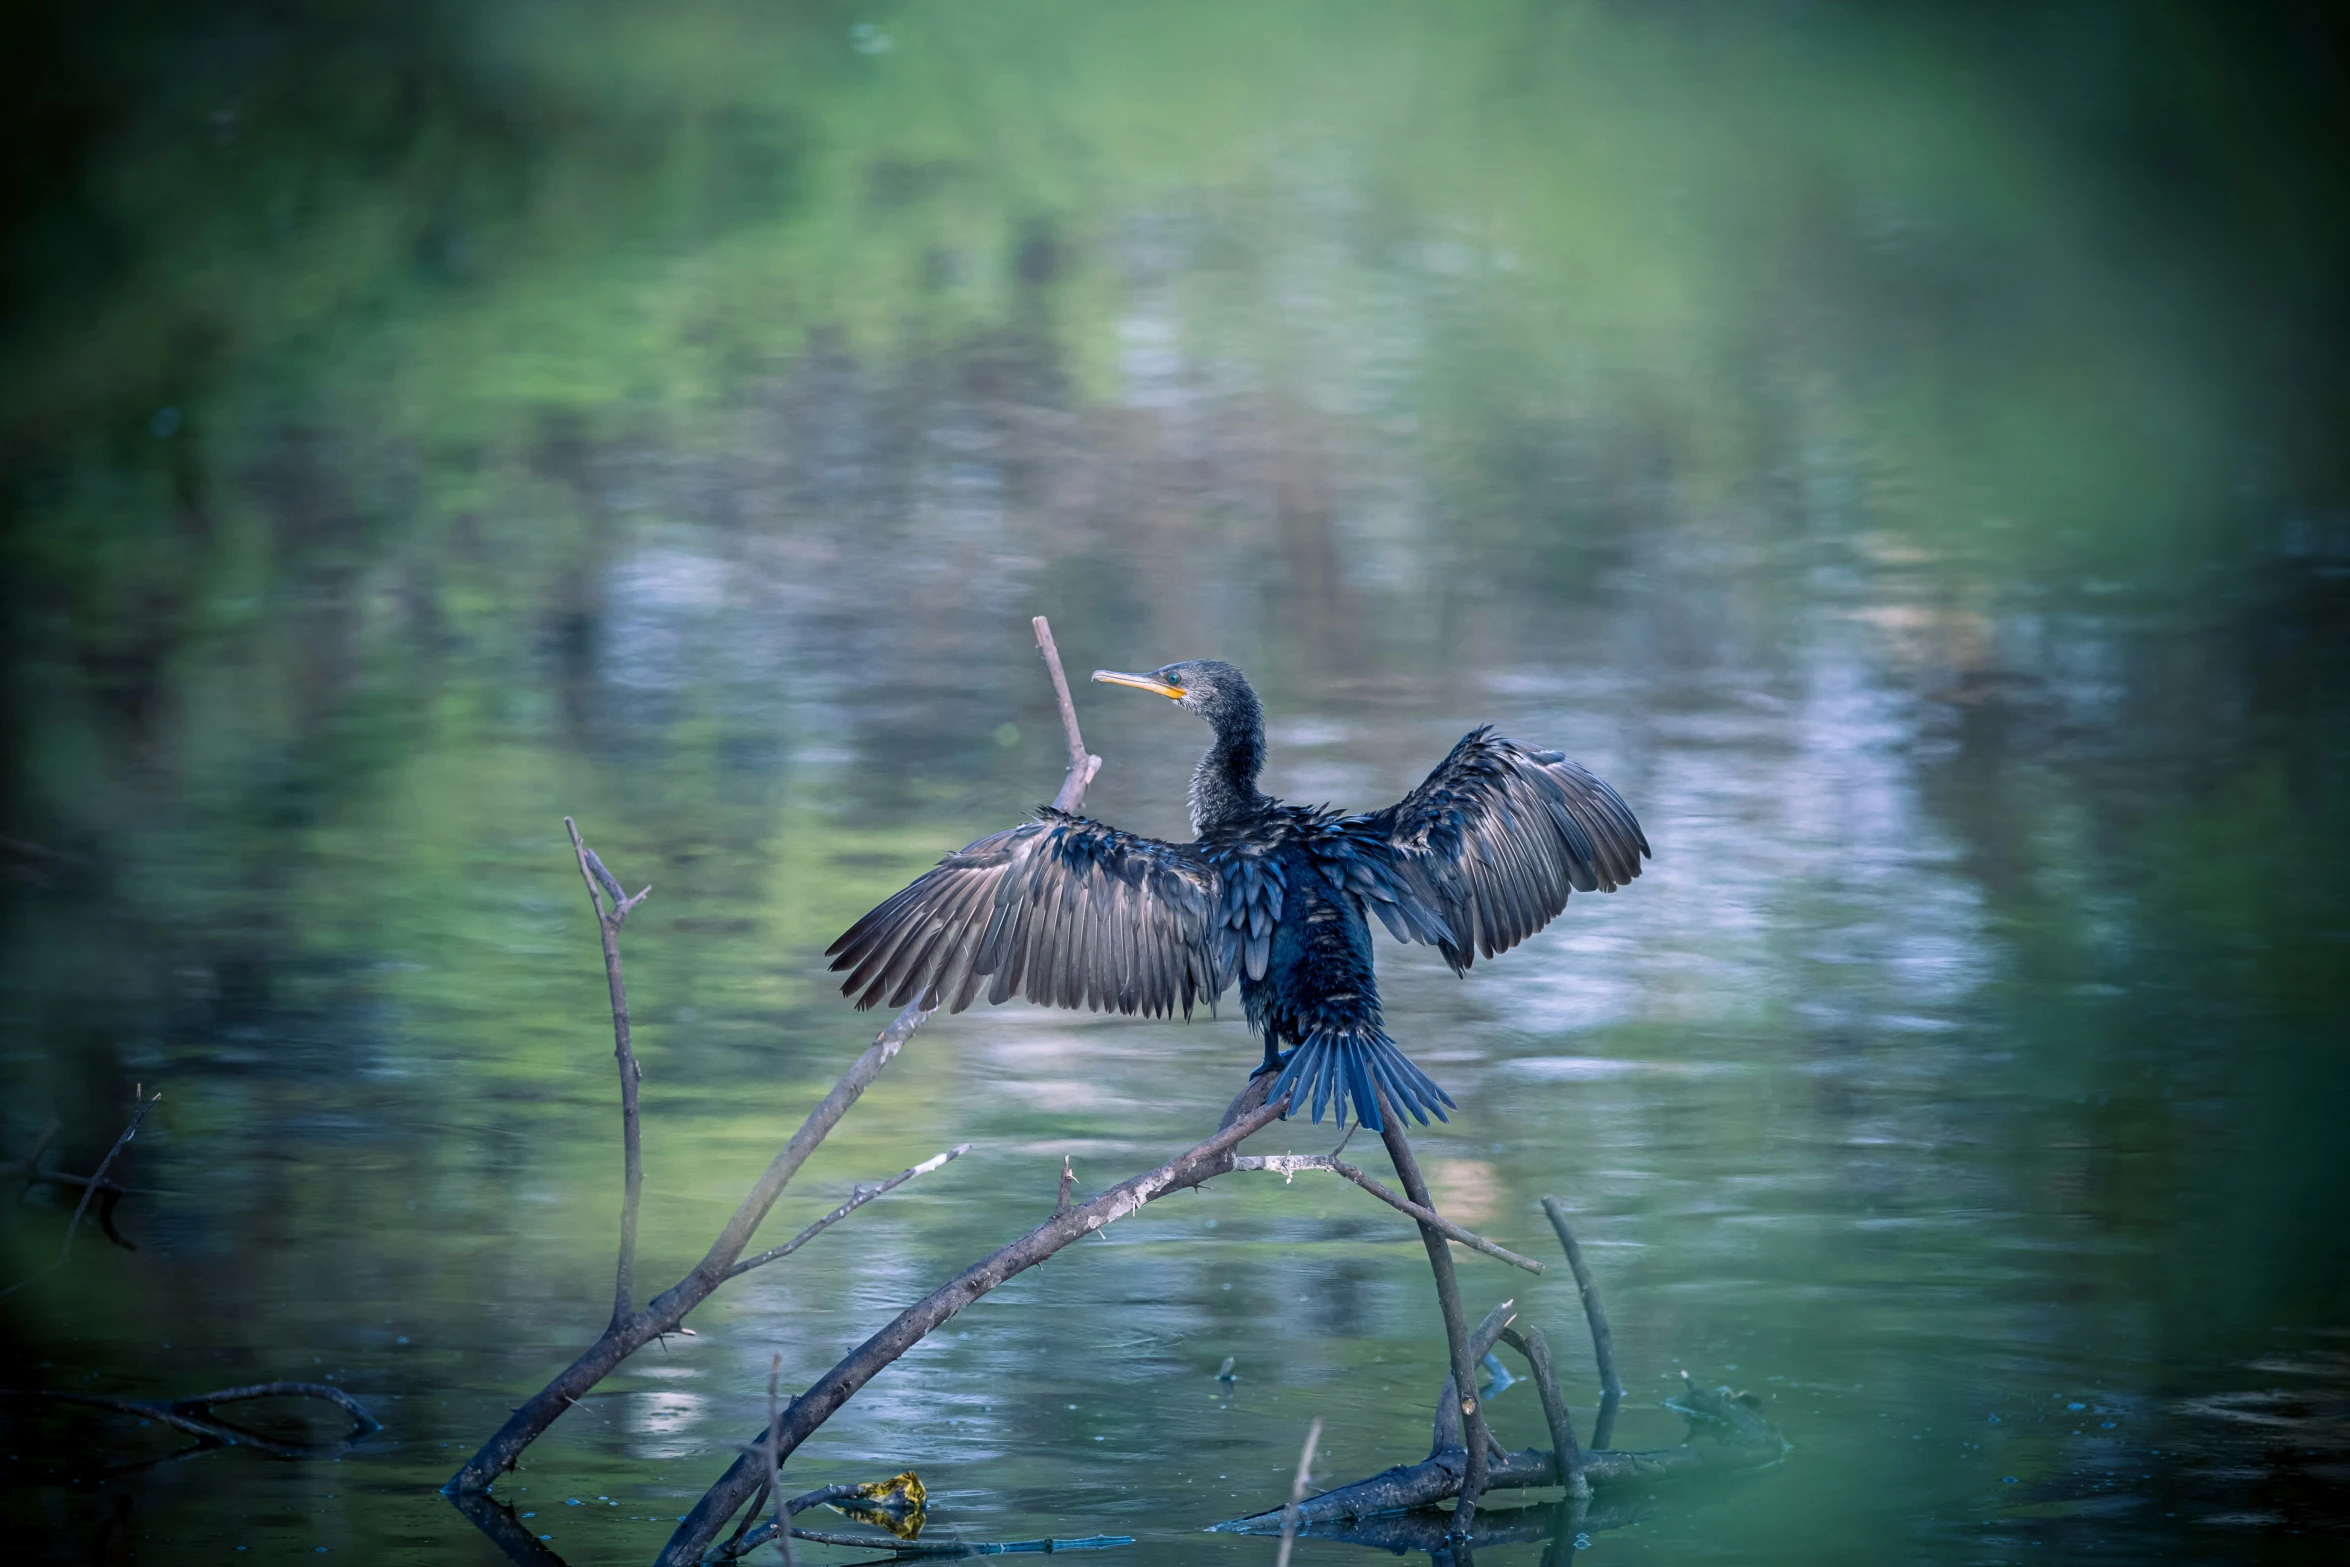 a large bird landing on the nch in a lake